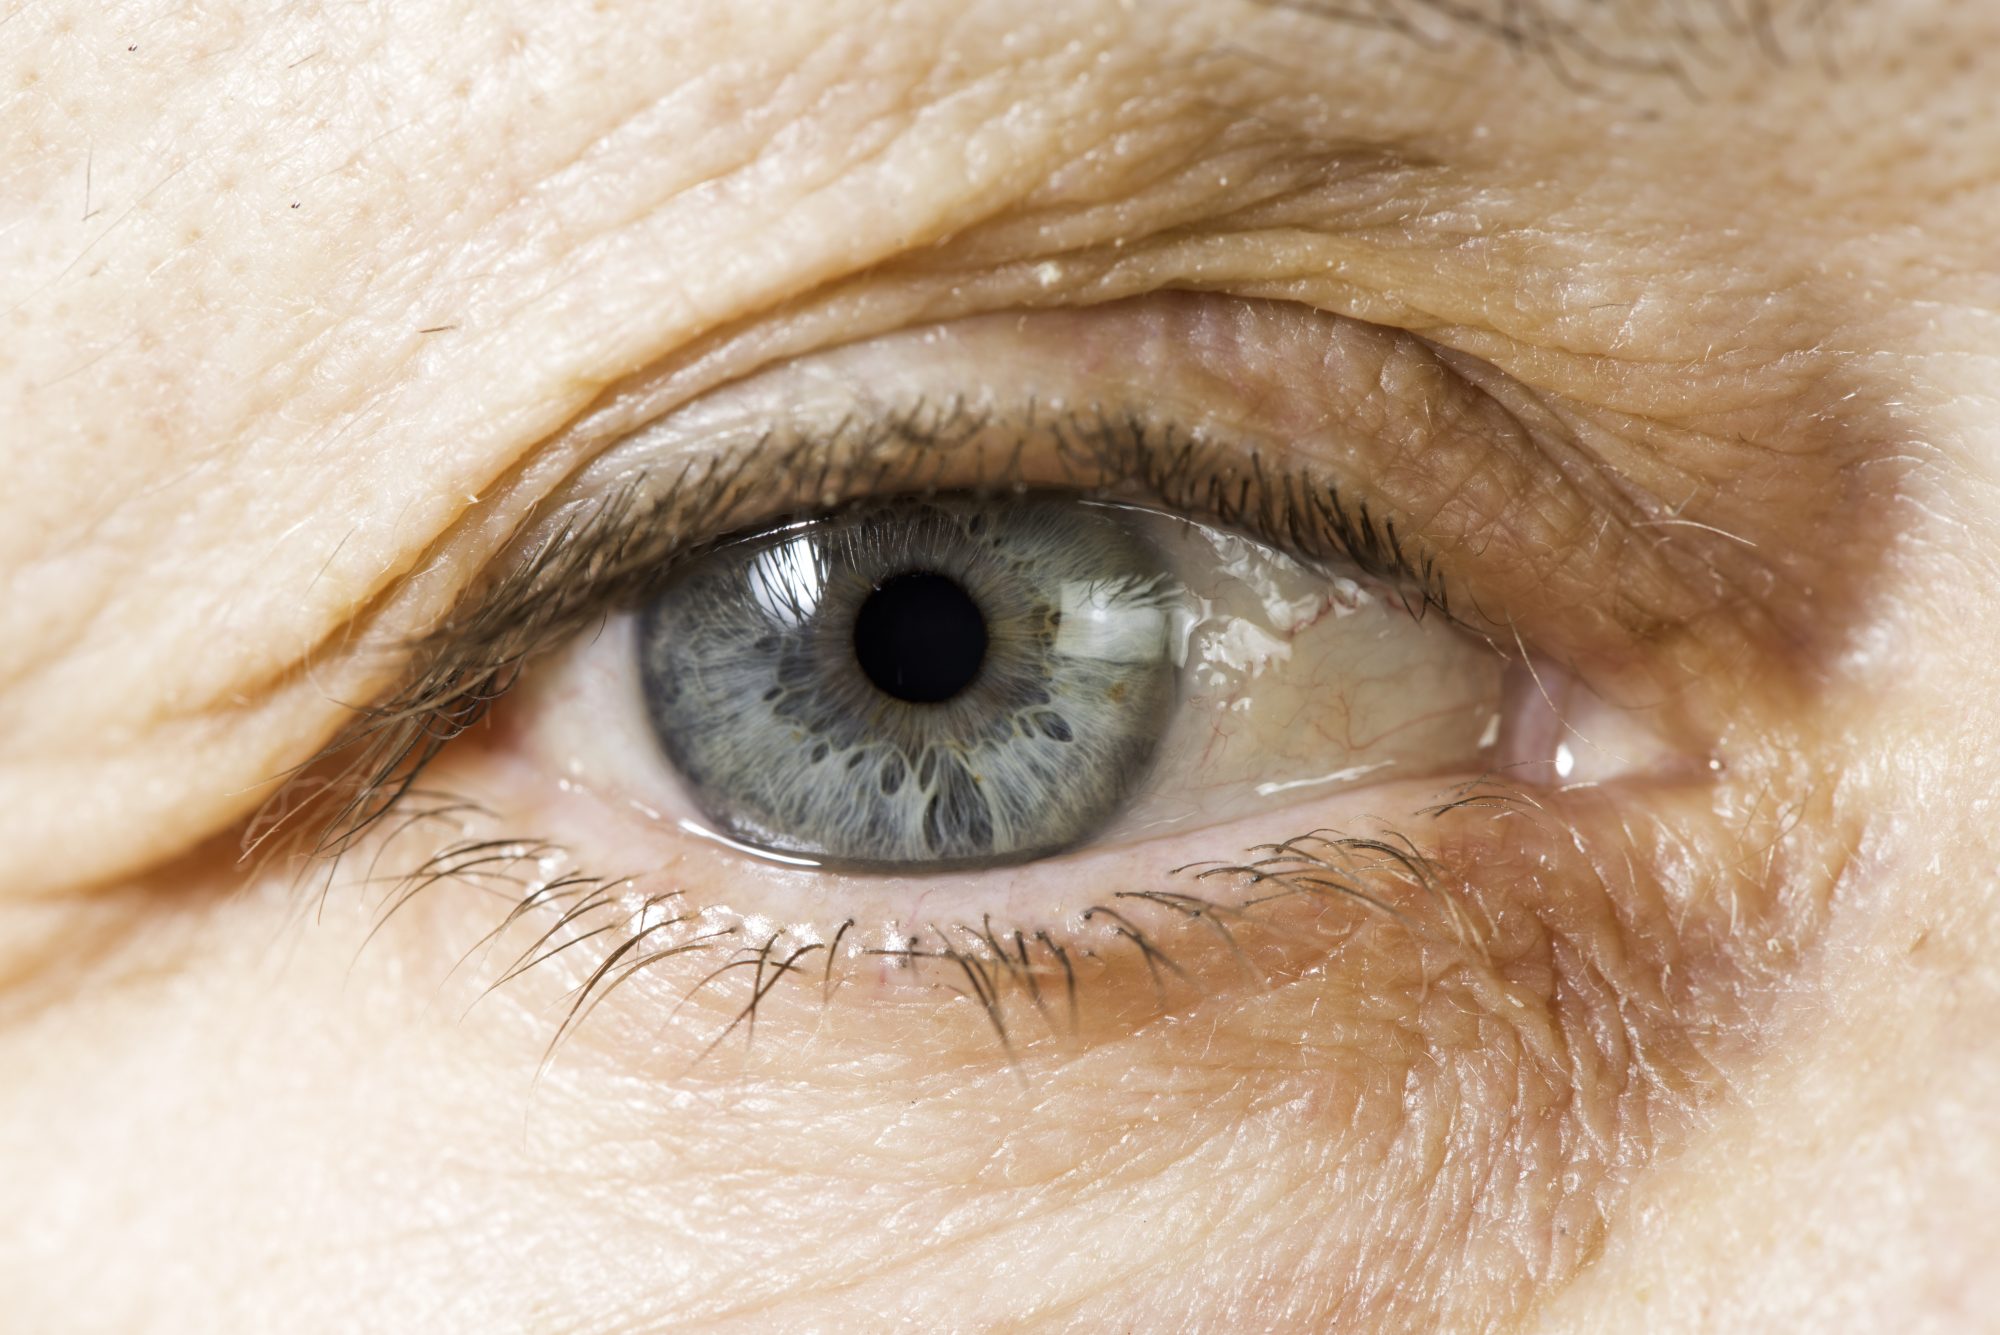 How to maintain eye health & take care of aging eyes